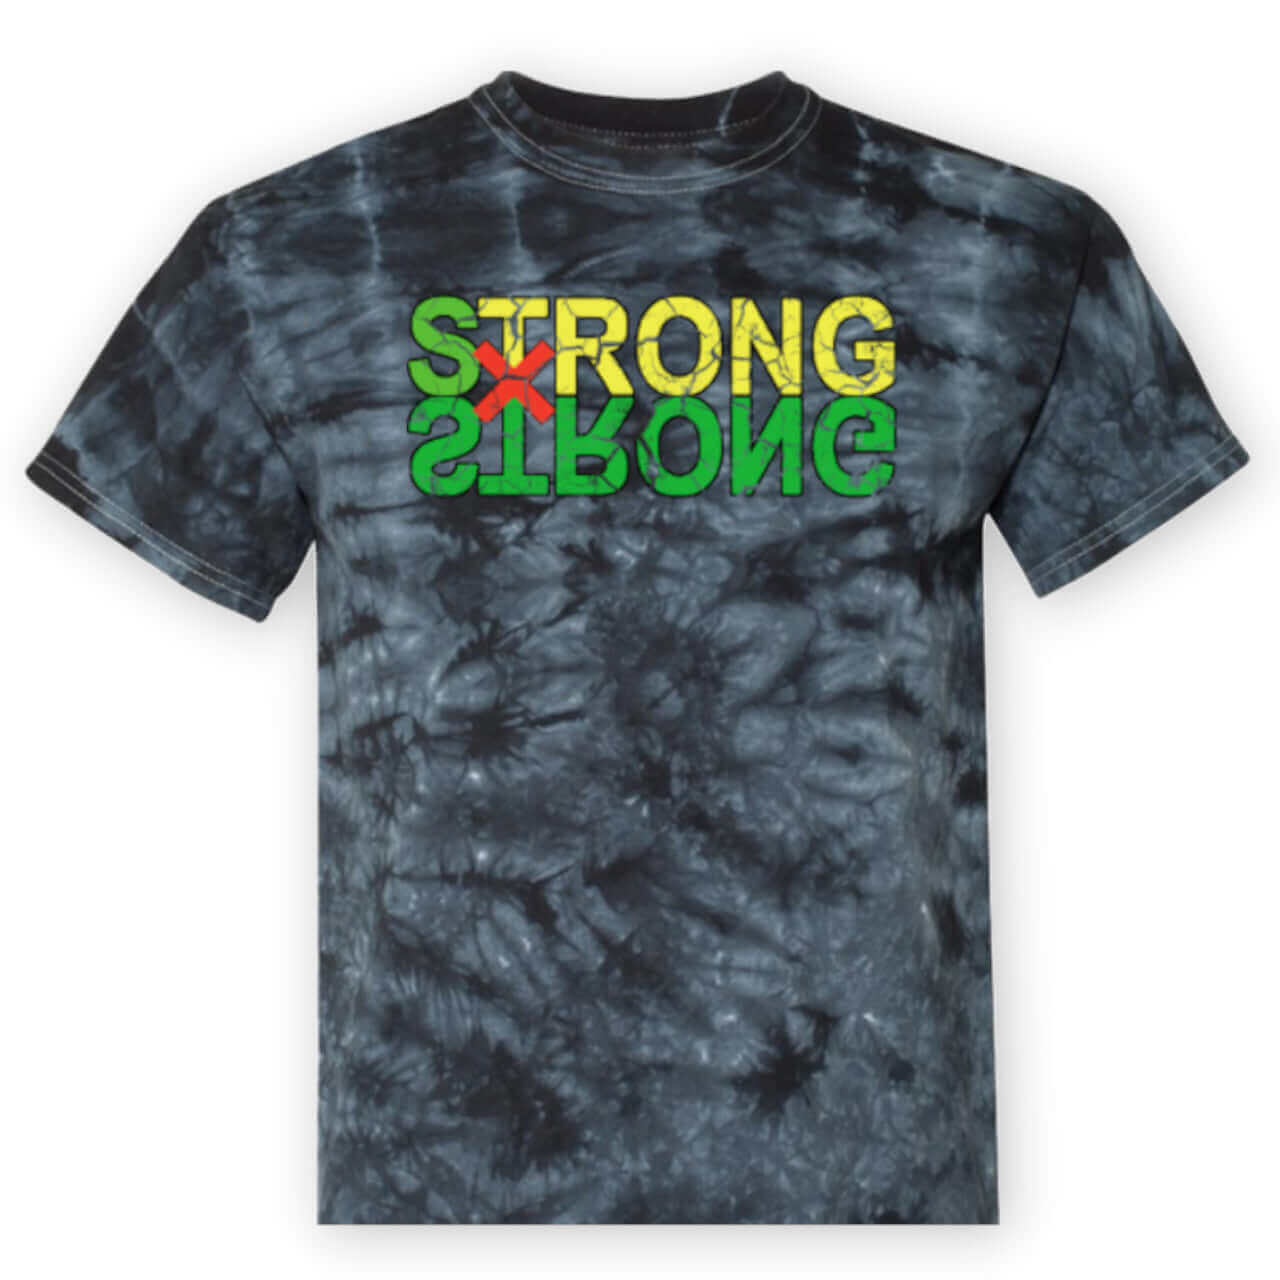 Strong x Strong print tie dye oversized shirt inspired by Hunter x Hunter anime